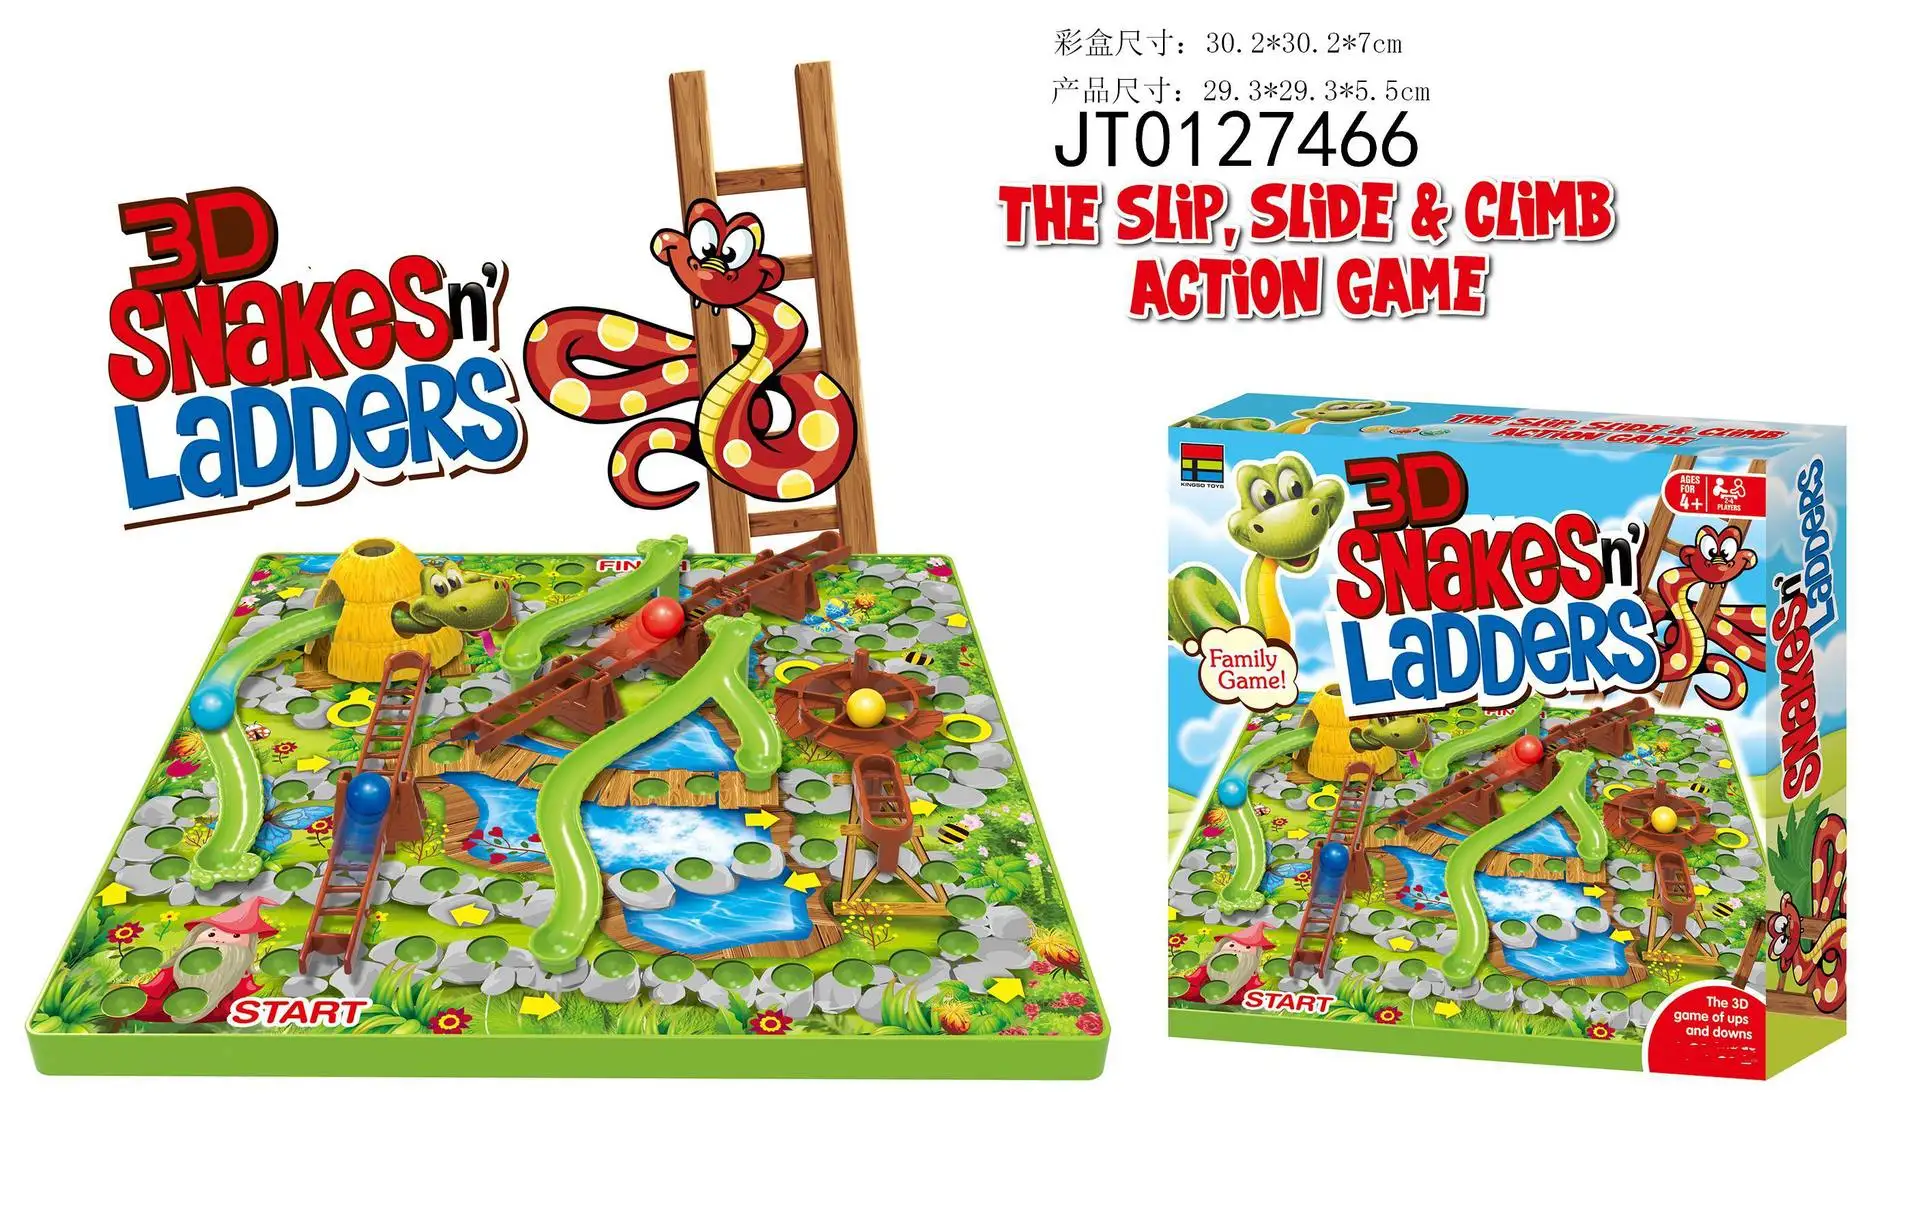 

Parent-Child Interactive Desktop Toys Foreign Trade Cross-Border 3D Snakes & Ladders Game